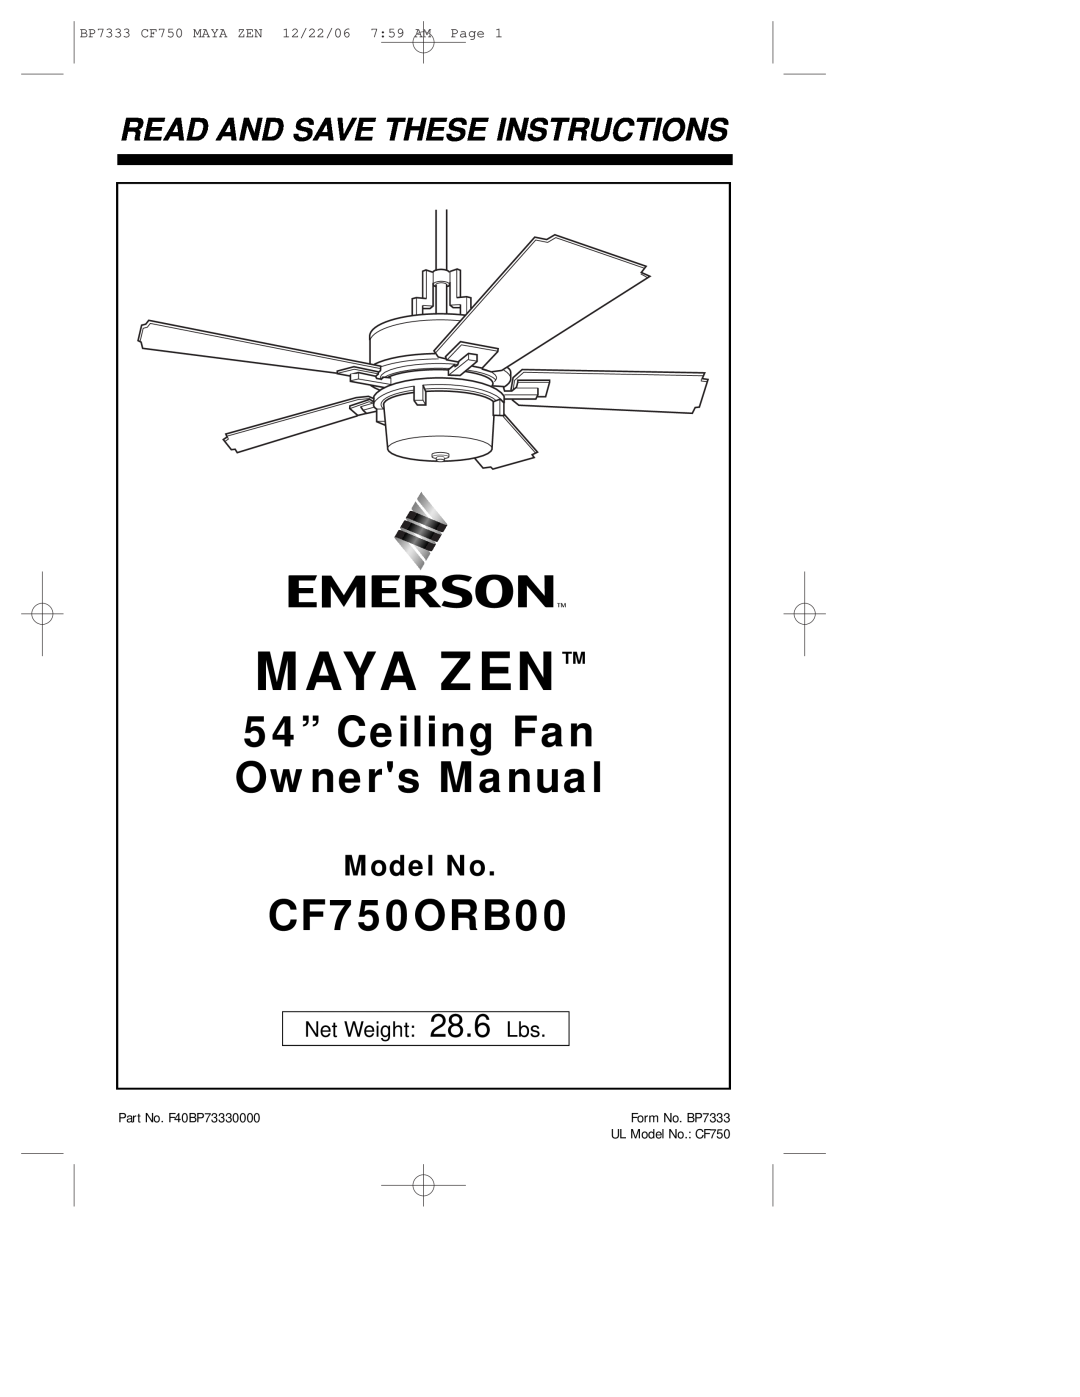 Emerson CF750ORB00 owner manual Net Weight 28.6 Lbs, Maya Zen, 54” Ceiling Fan, Read And Save These Instructions, Model No 